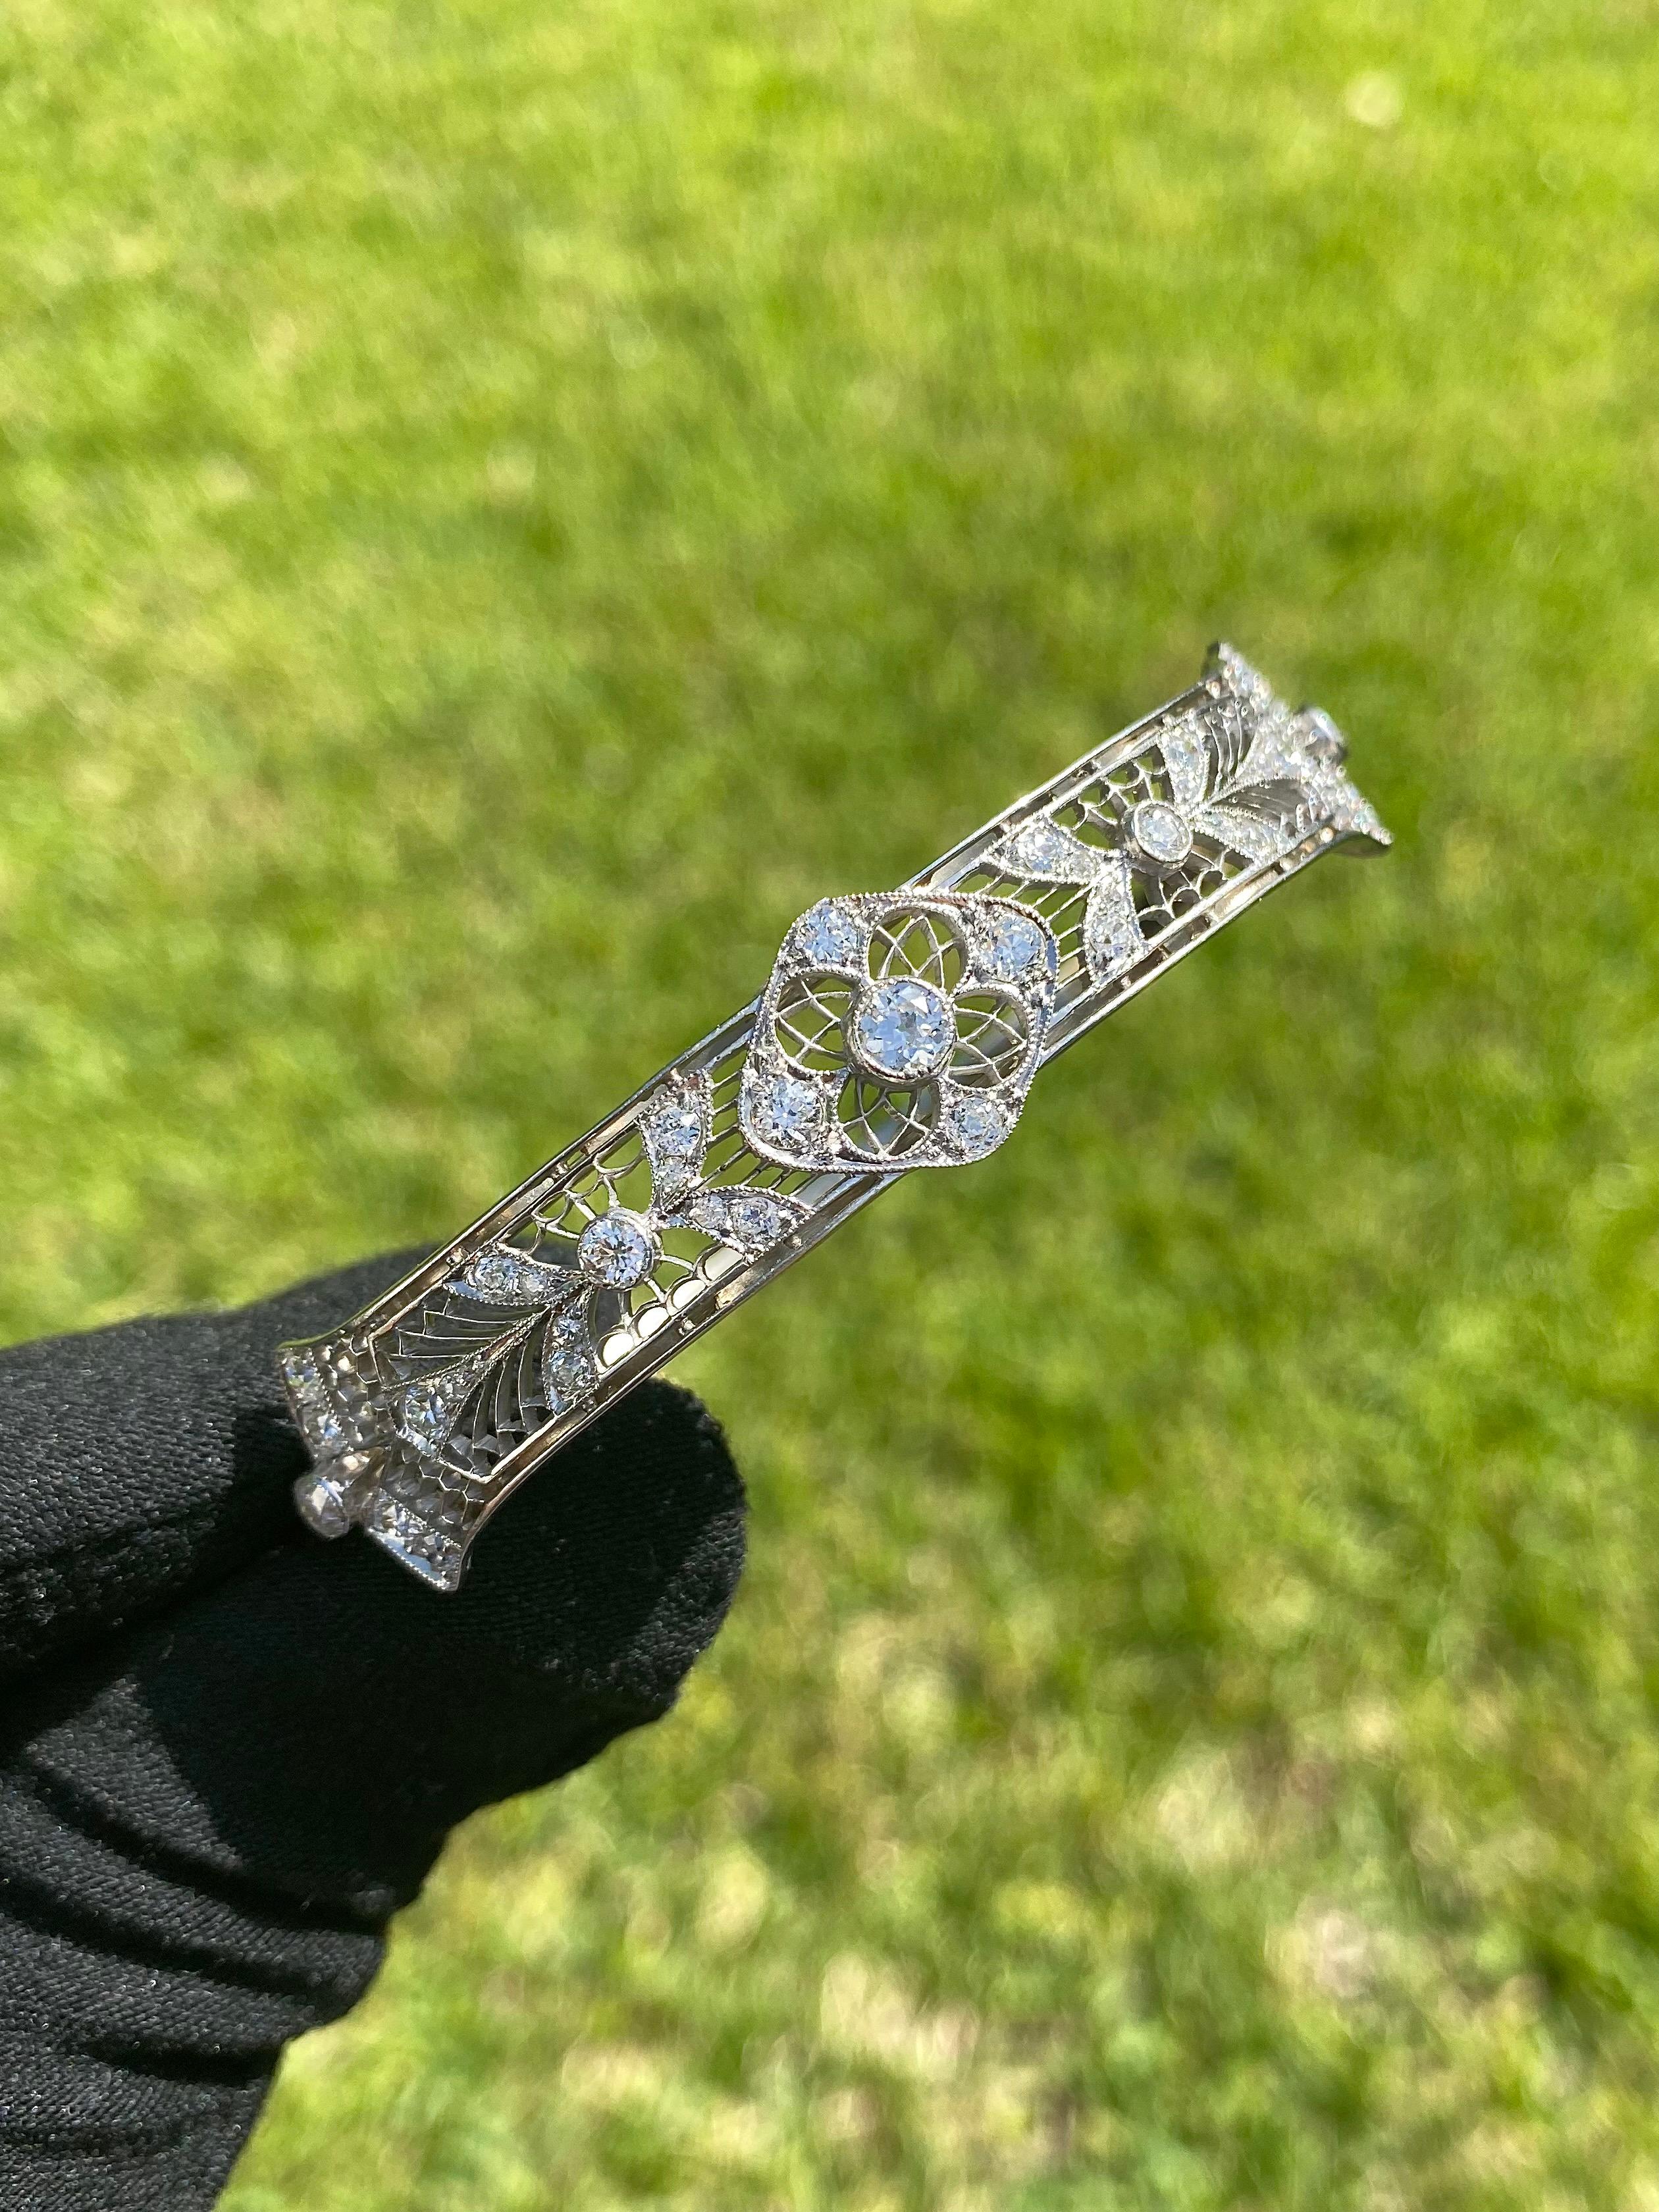 Original Art Deco bangle with over 2 carats in Old-European cut natural diamonds. This bangle fits comfortably on wrist sizes ranging from 7 inches to 7.75 inches. The bangle's front is an original Art Deco piece made in platinum, while the back was